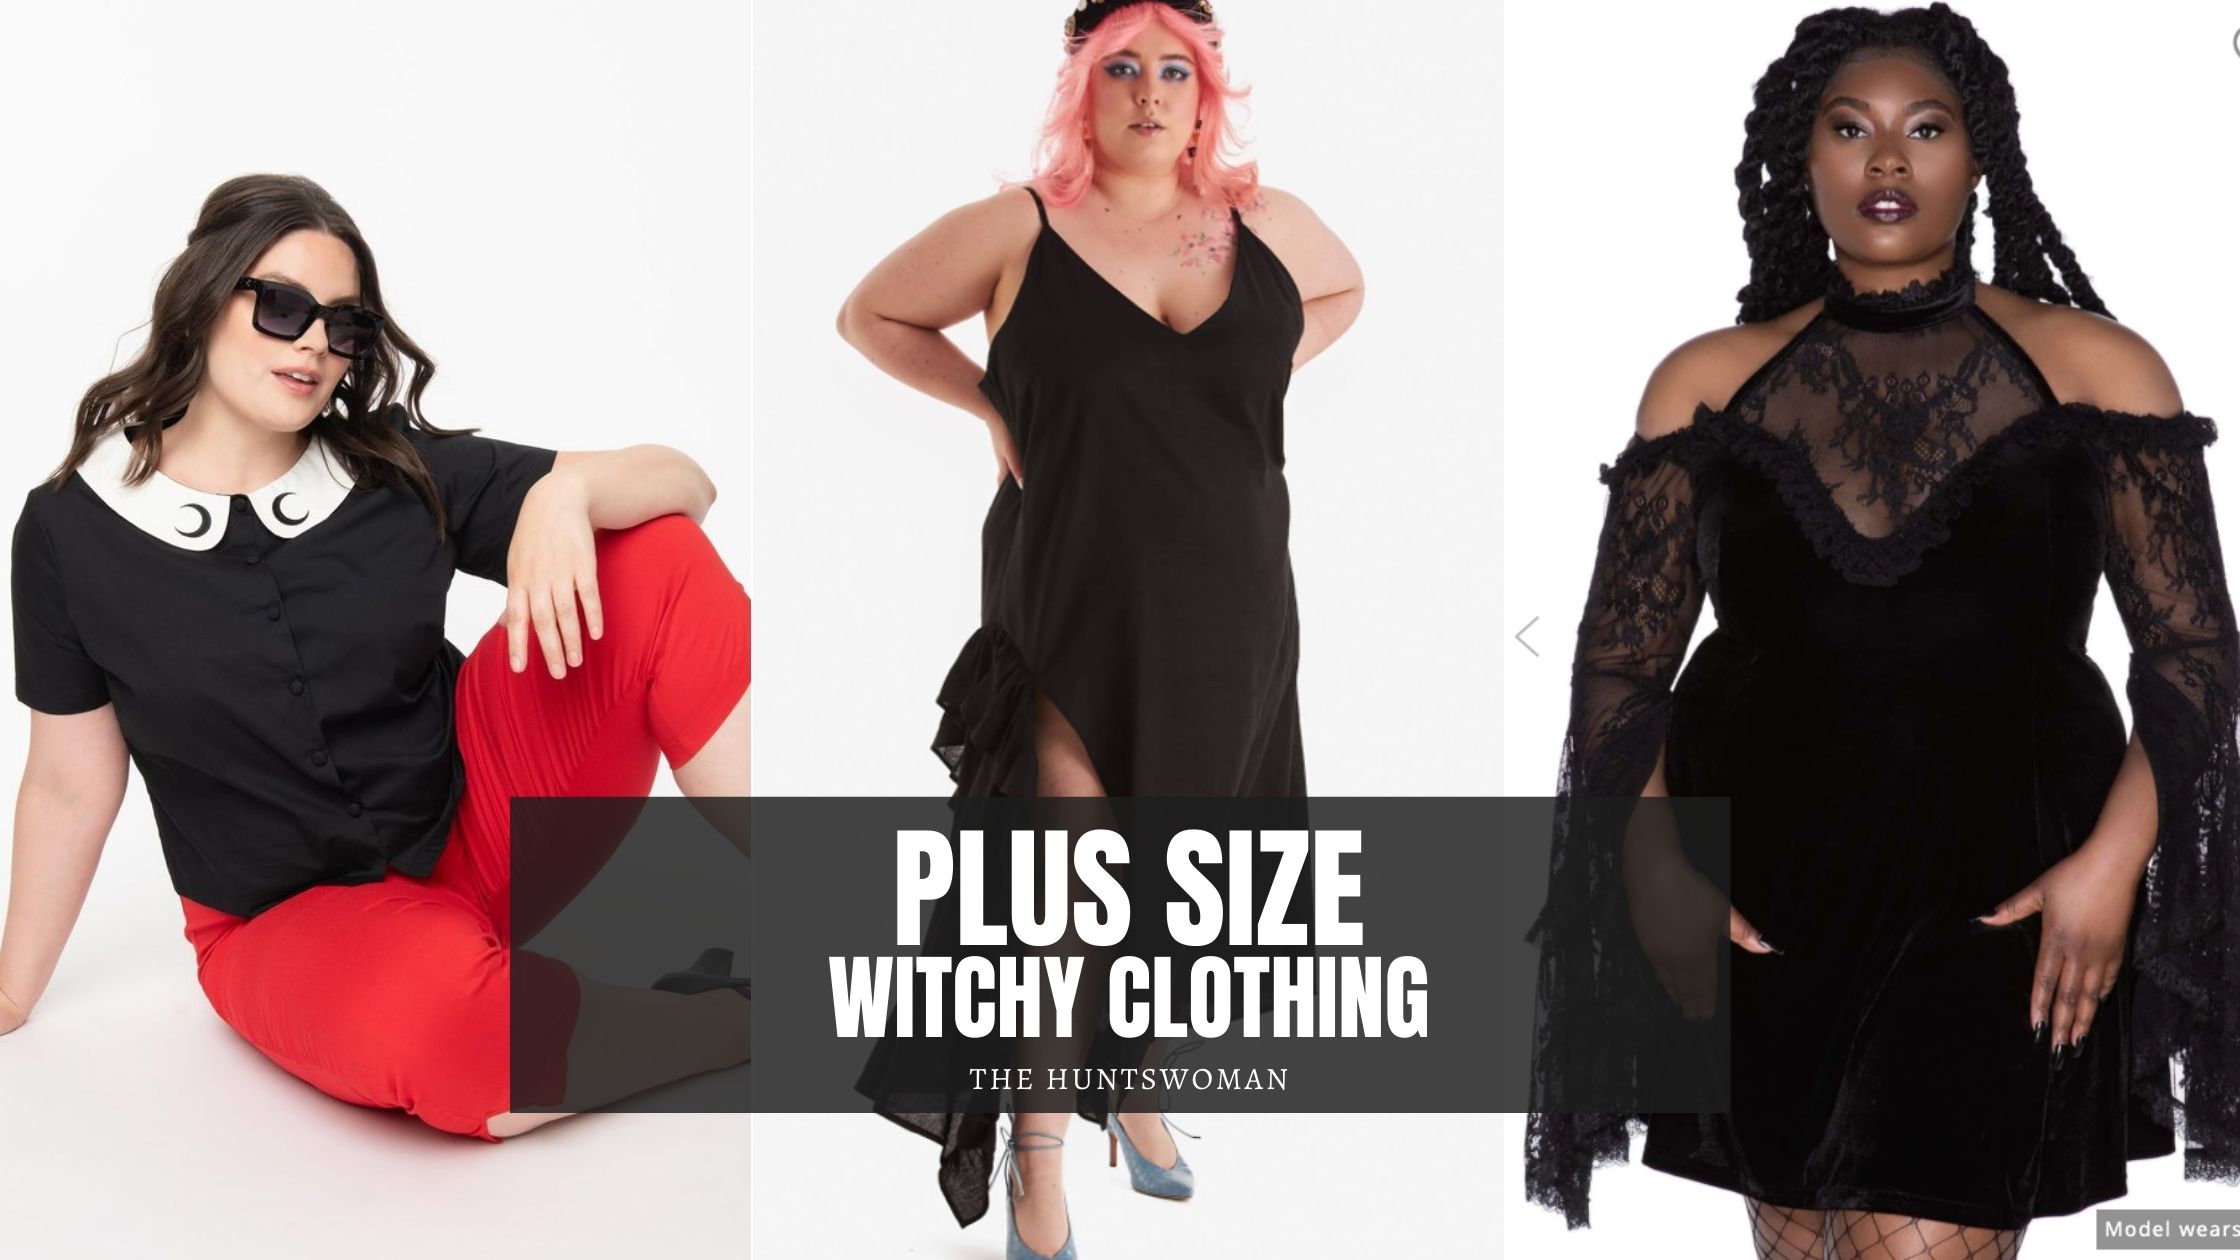 Where to Shop for Plus Size Witchy Clothing